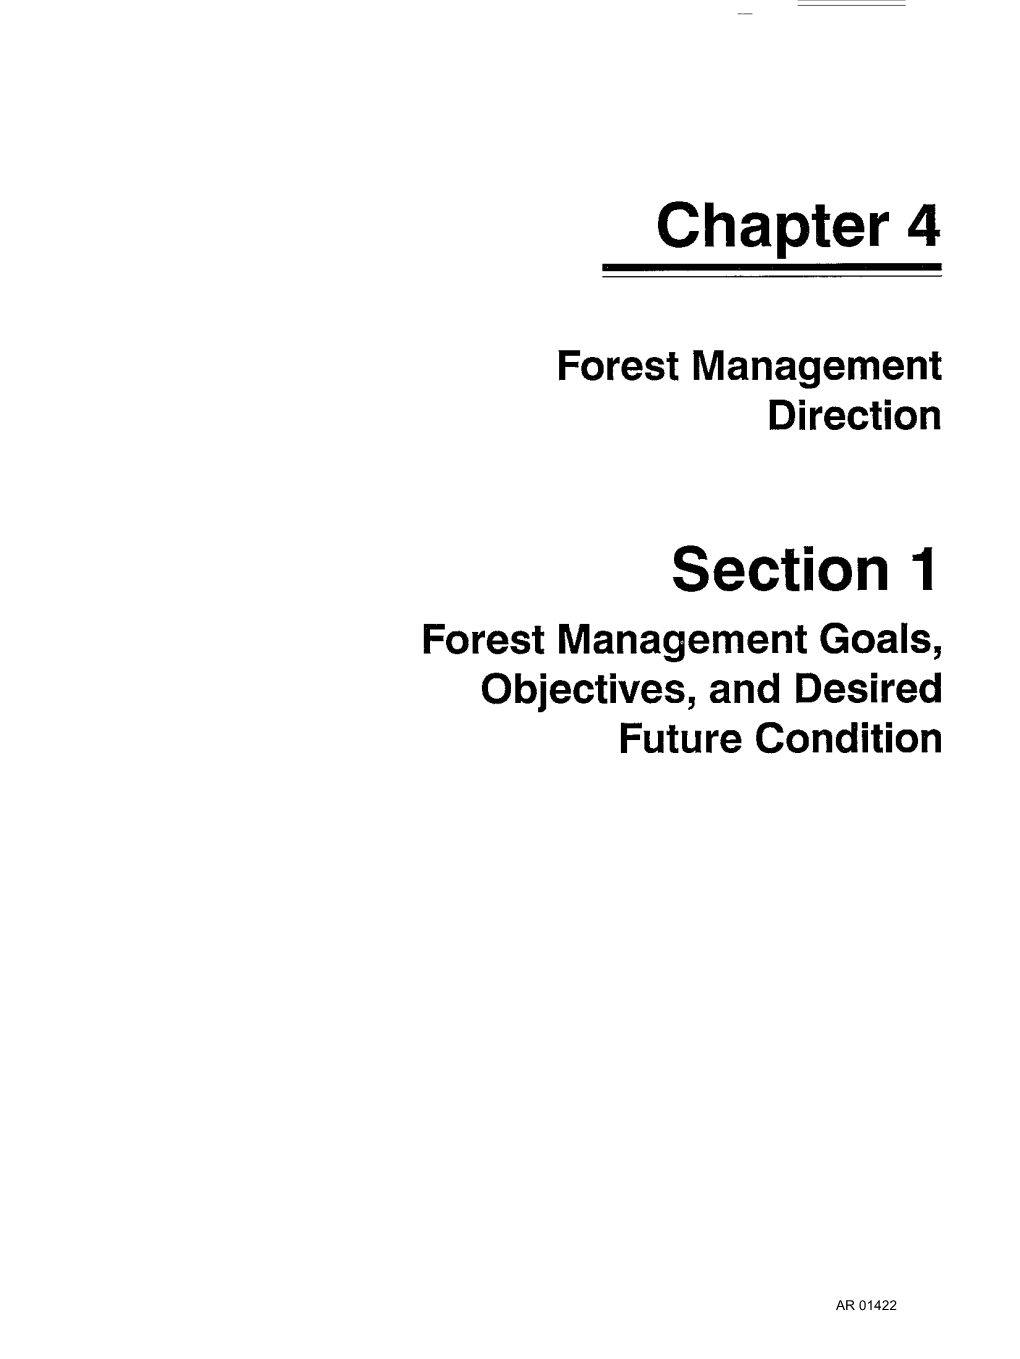 Chapter 4 Forest Management Direction